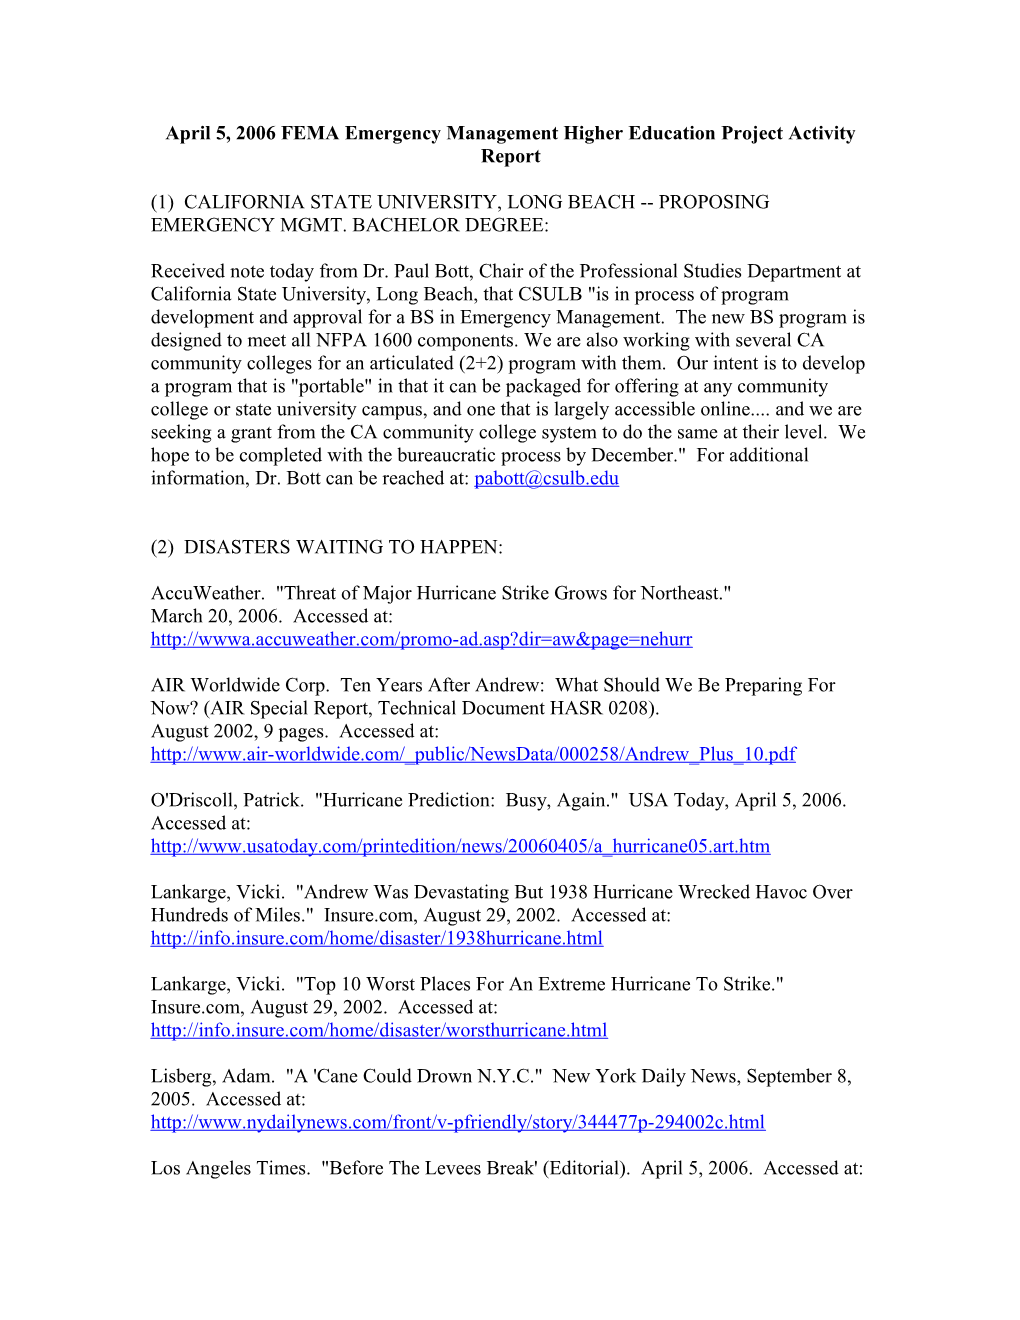 April 5, 2006 FEMA Emergency Management Higher Education Project Activity Report